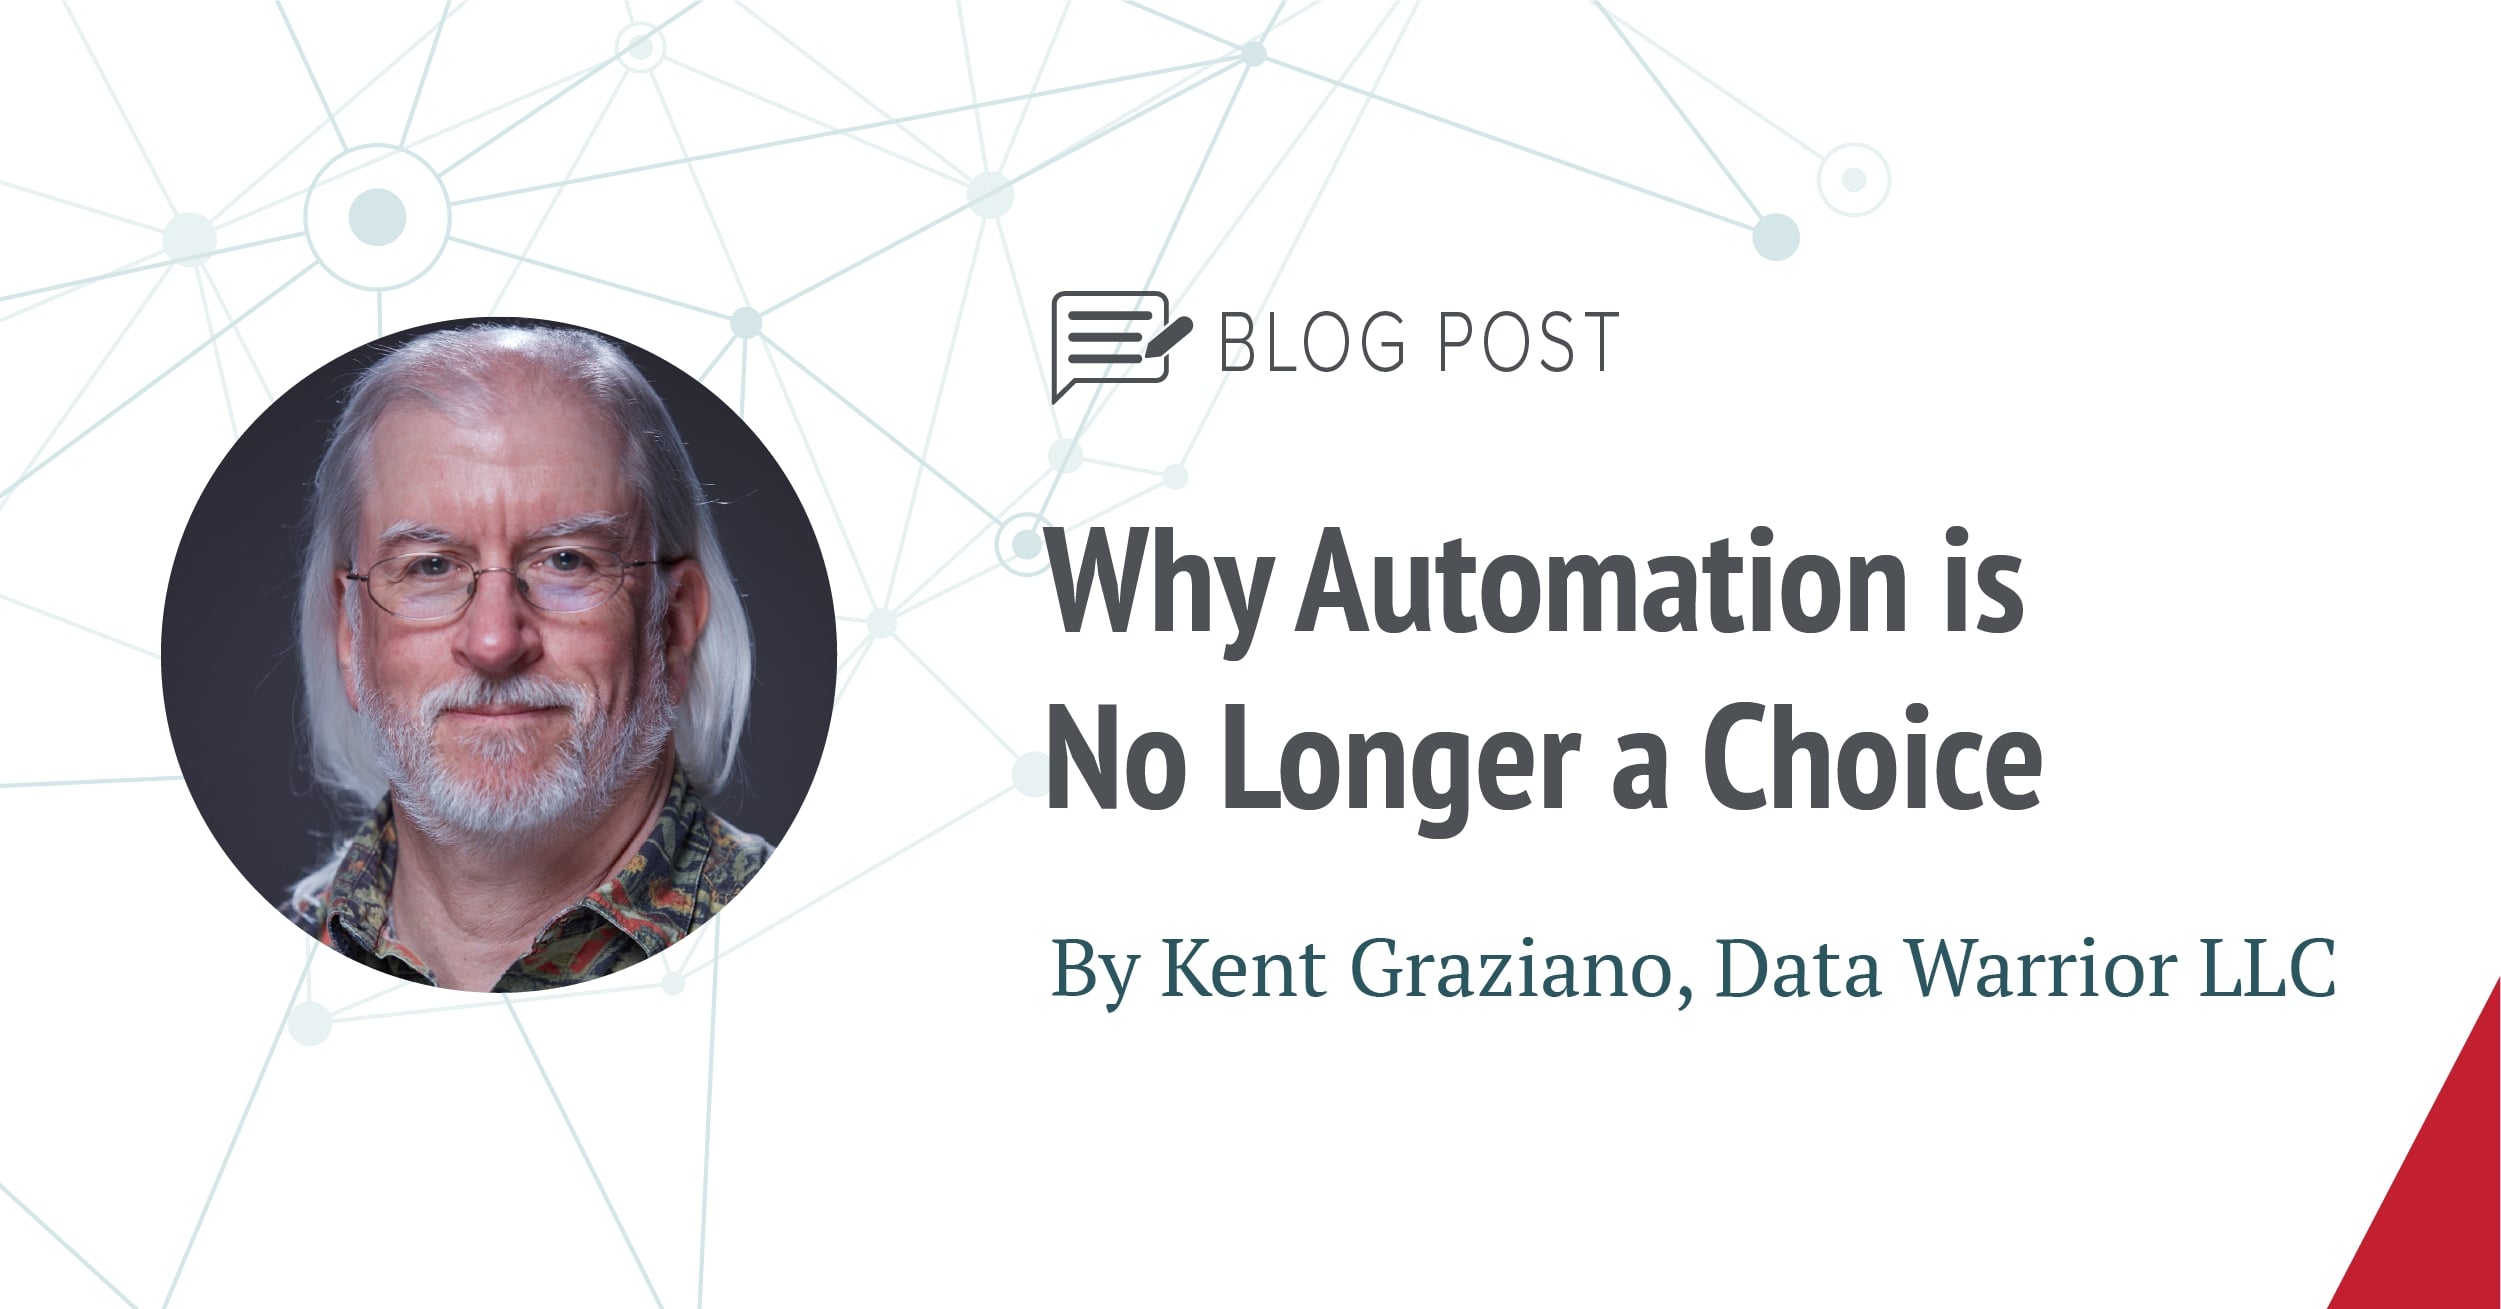 Why Automation is No Longer a Choice for Your Data Architecture